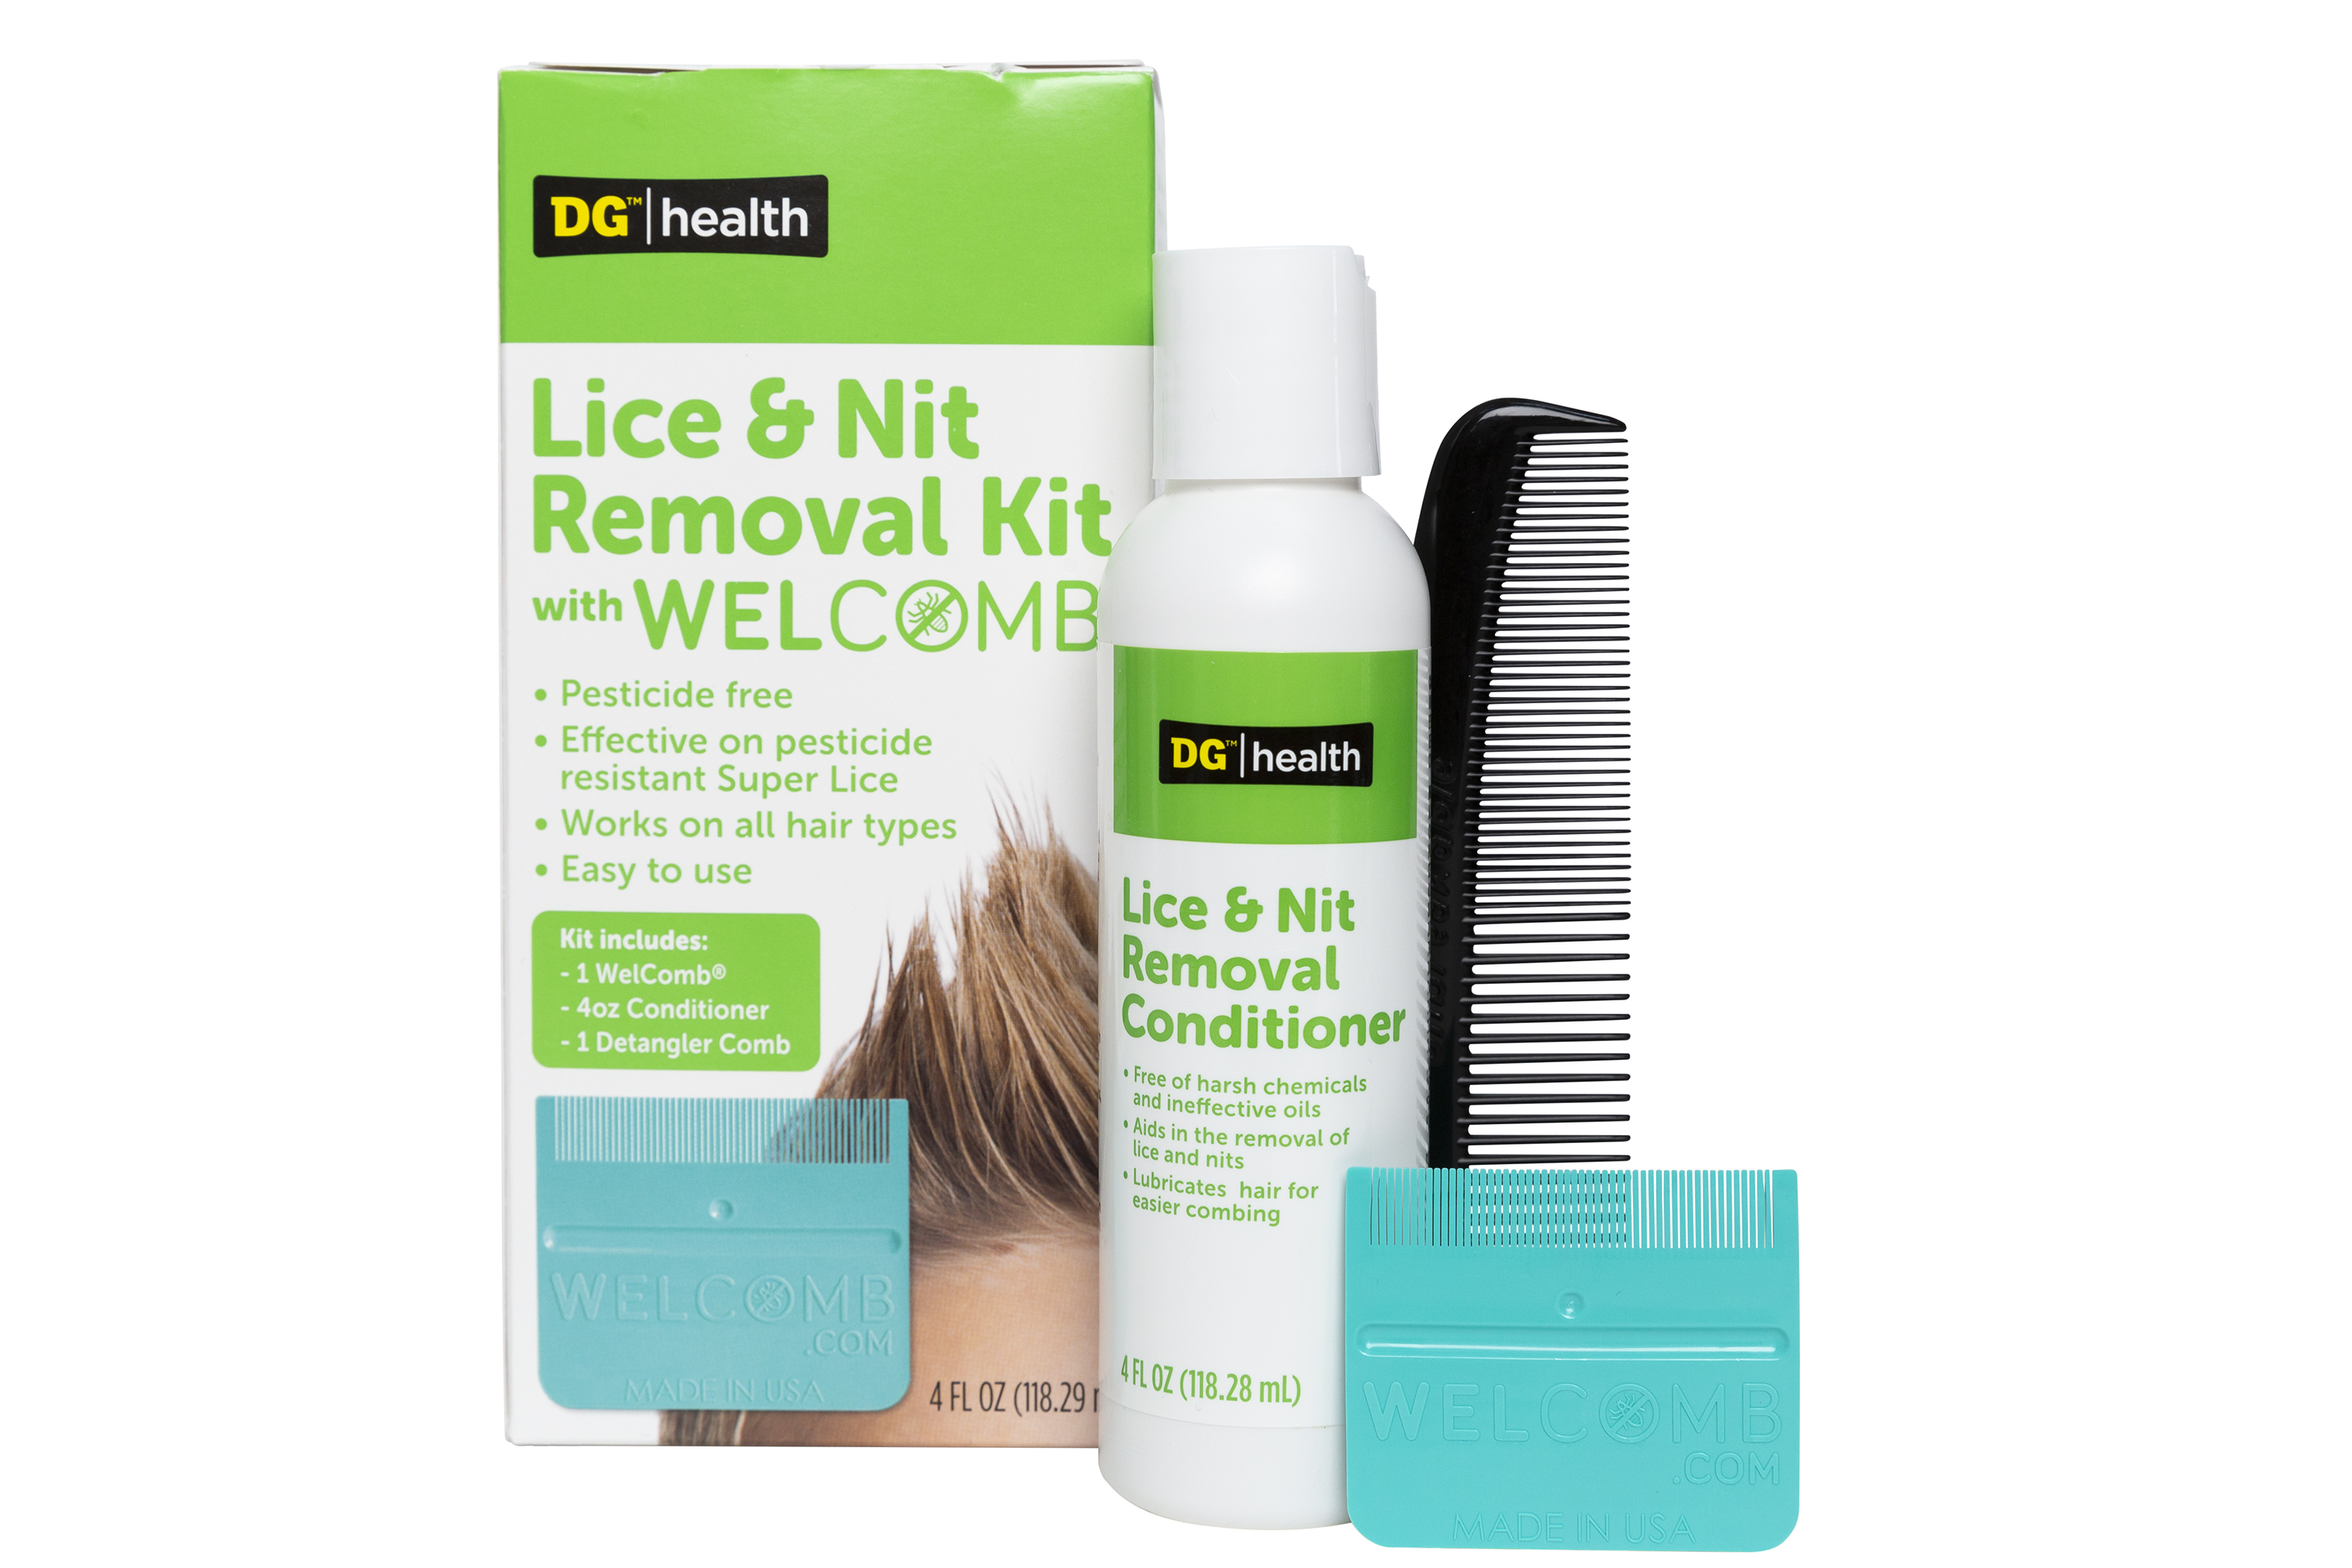 Introducing the Dollar General Lice and Nit Removal Kit Featuring WelComb®